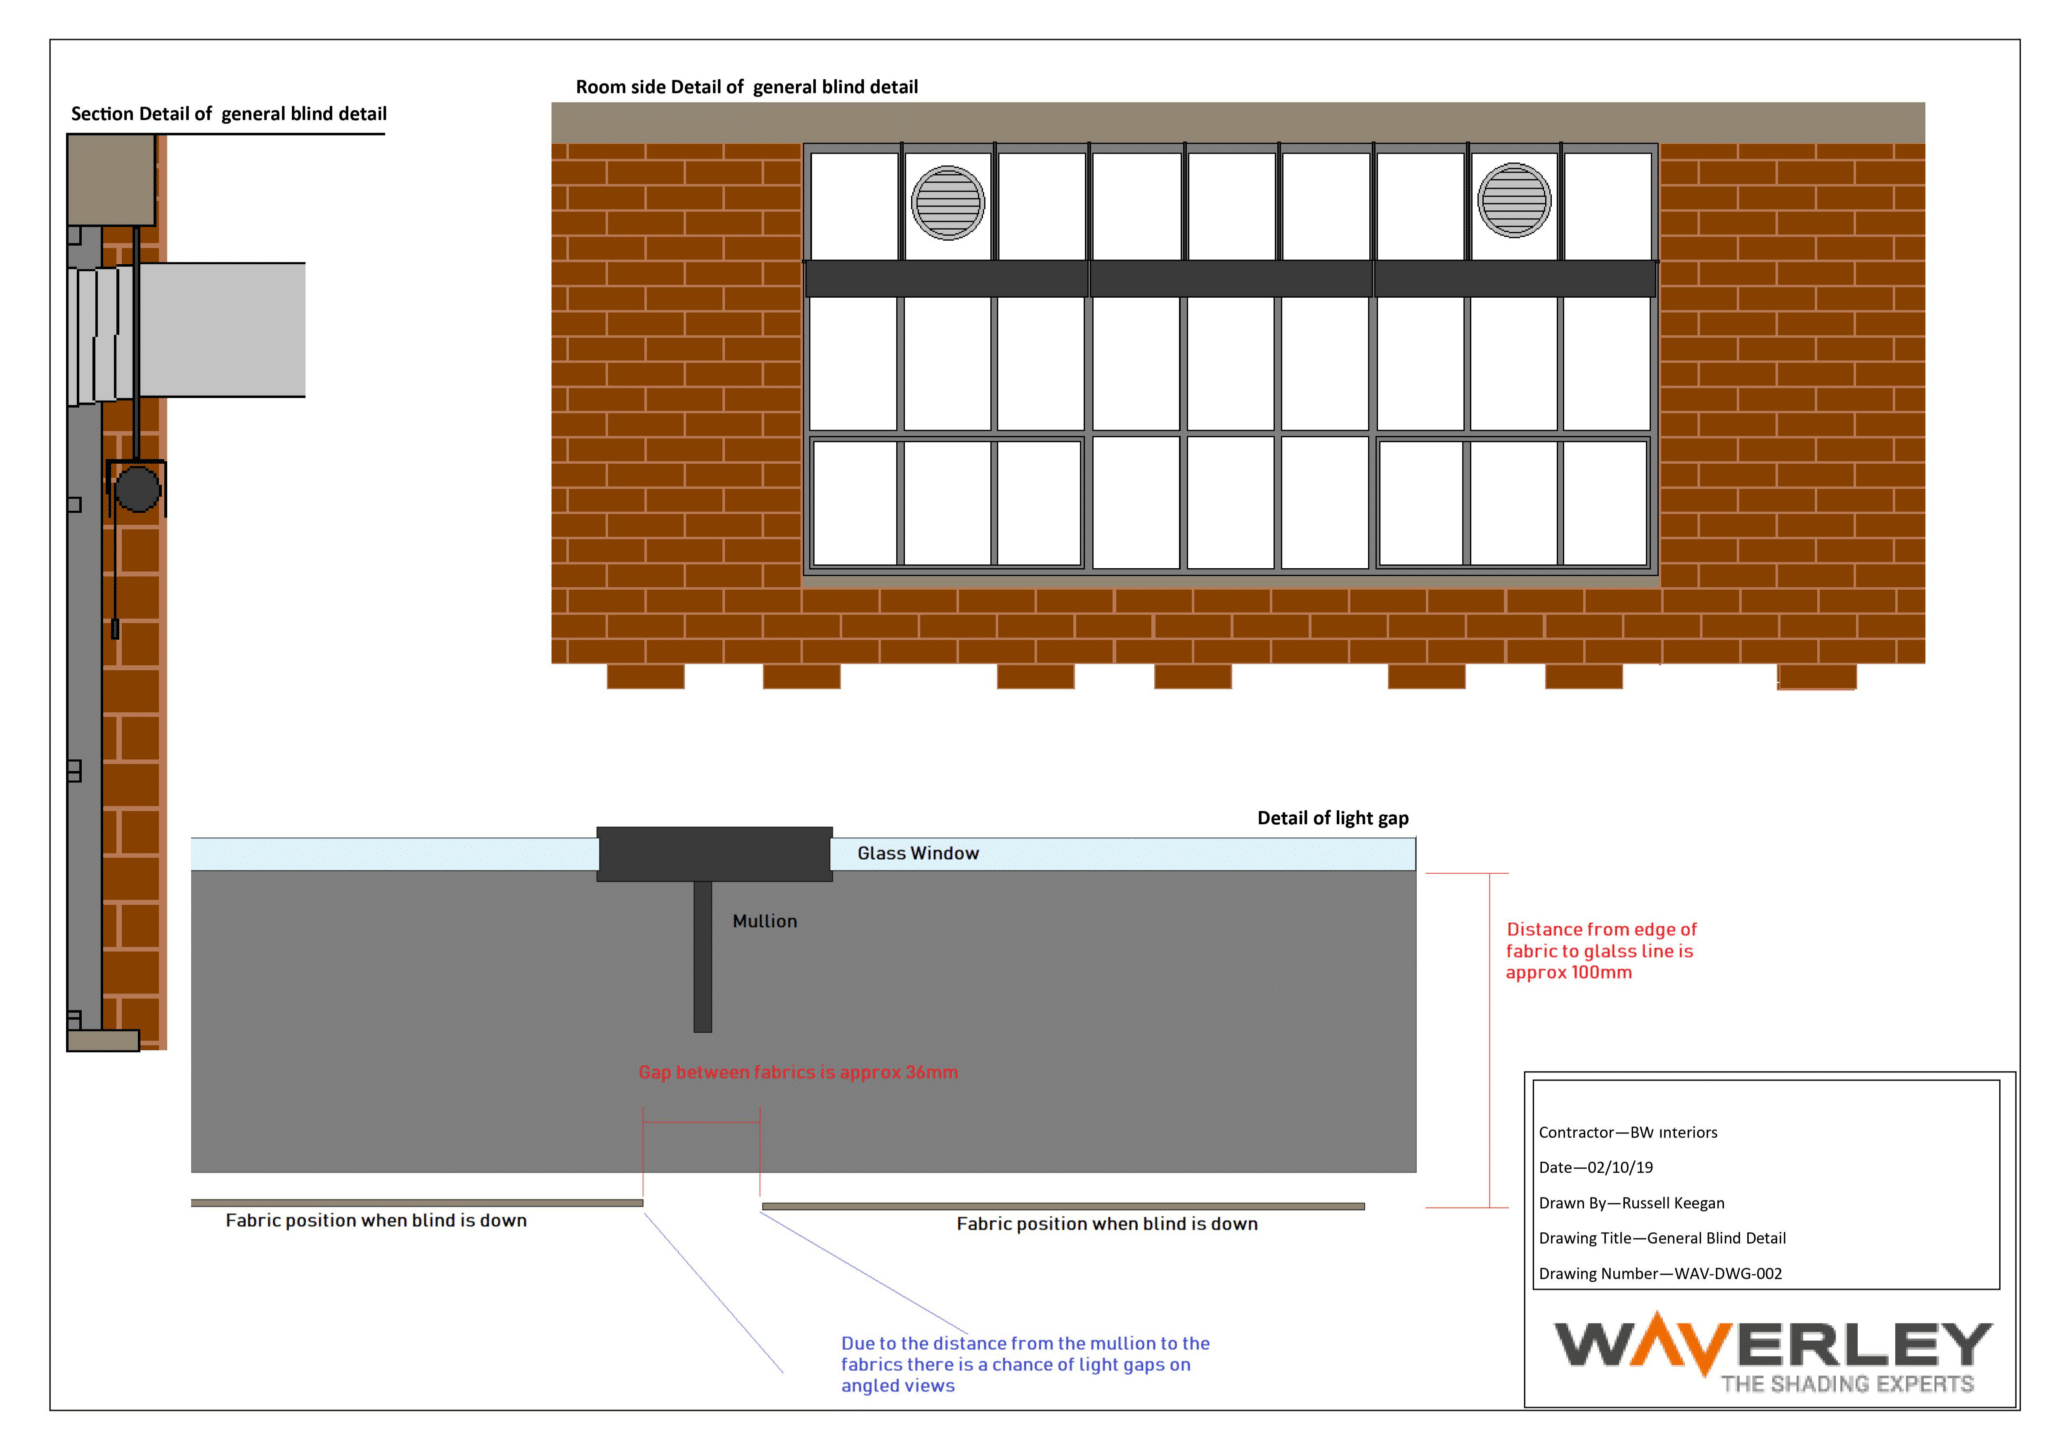 General Blind Detail WAV DWG 002 - confidential fit out project